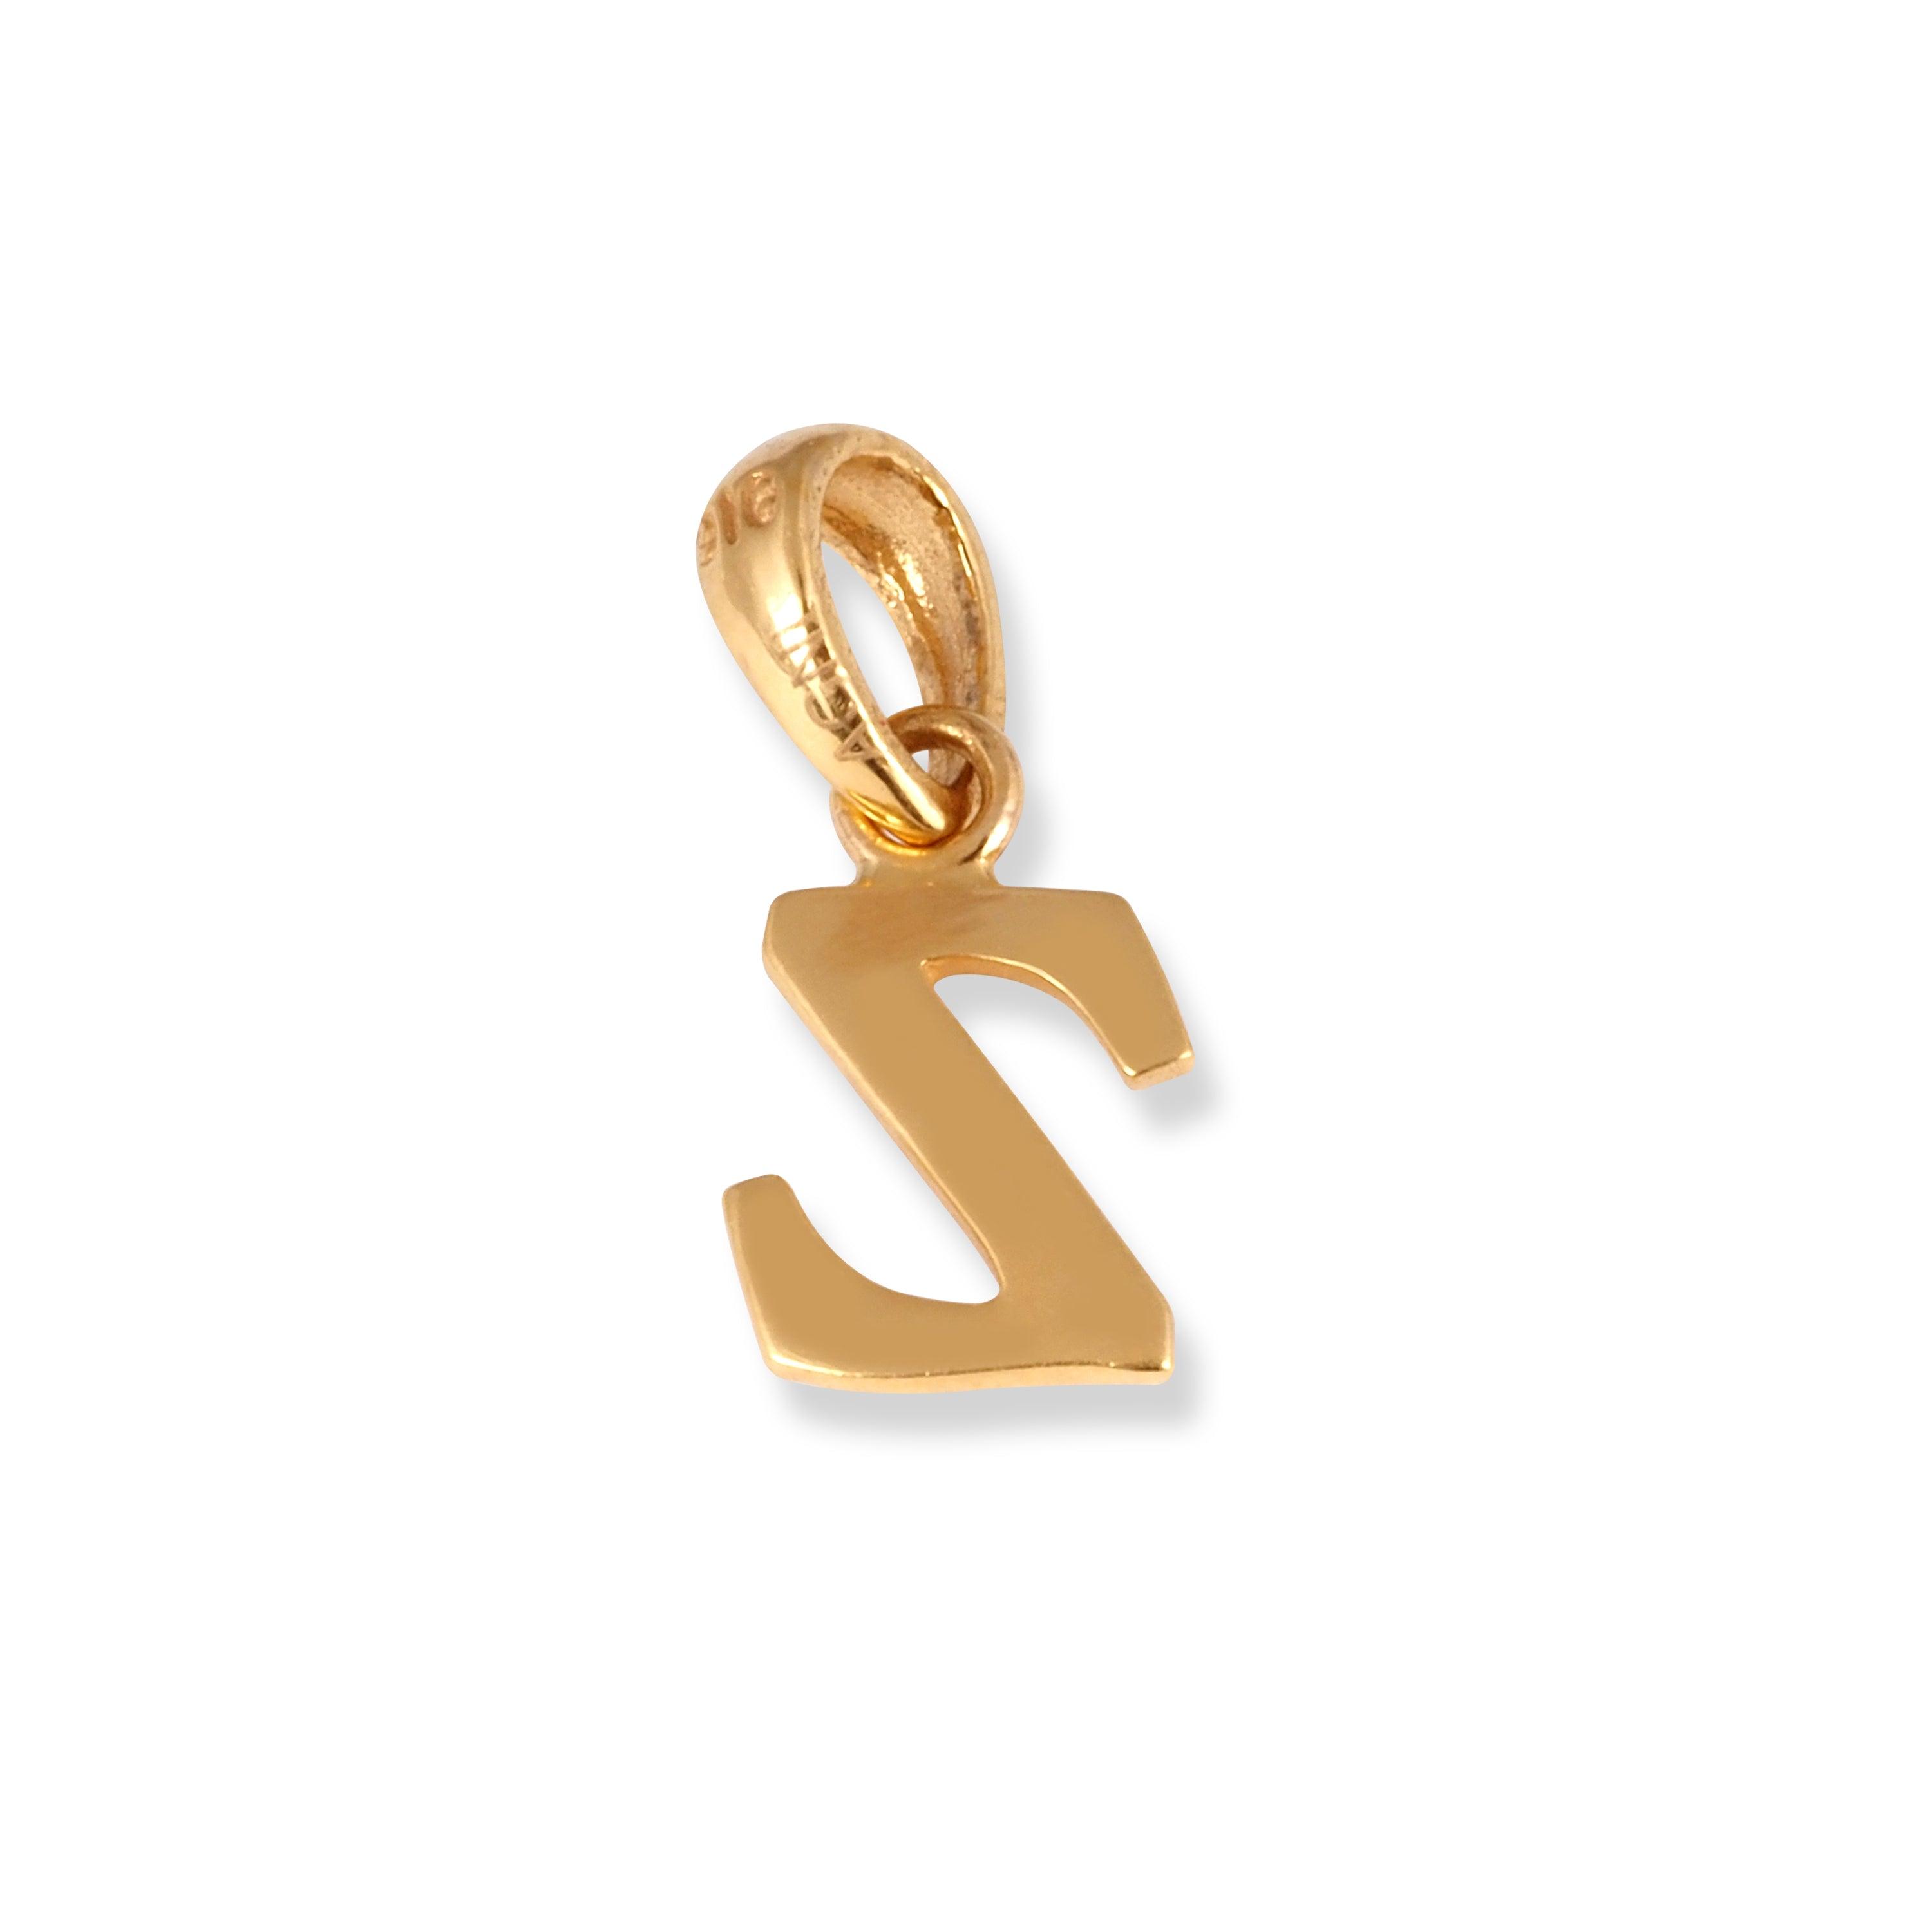 22ct Gold 'Z' Initial Pendant P-7037-Z - Minar Jewellers